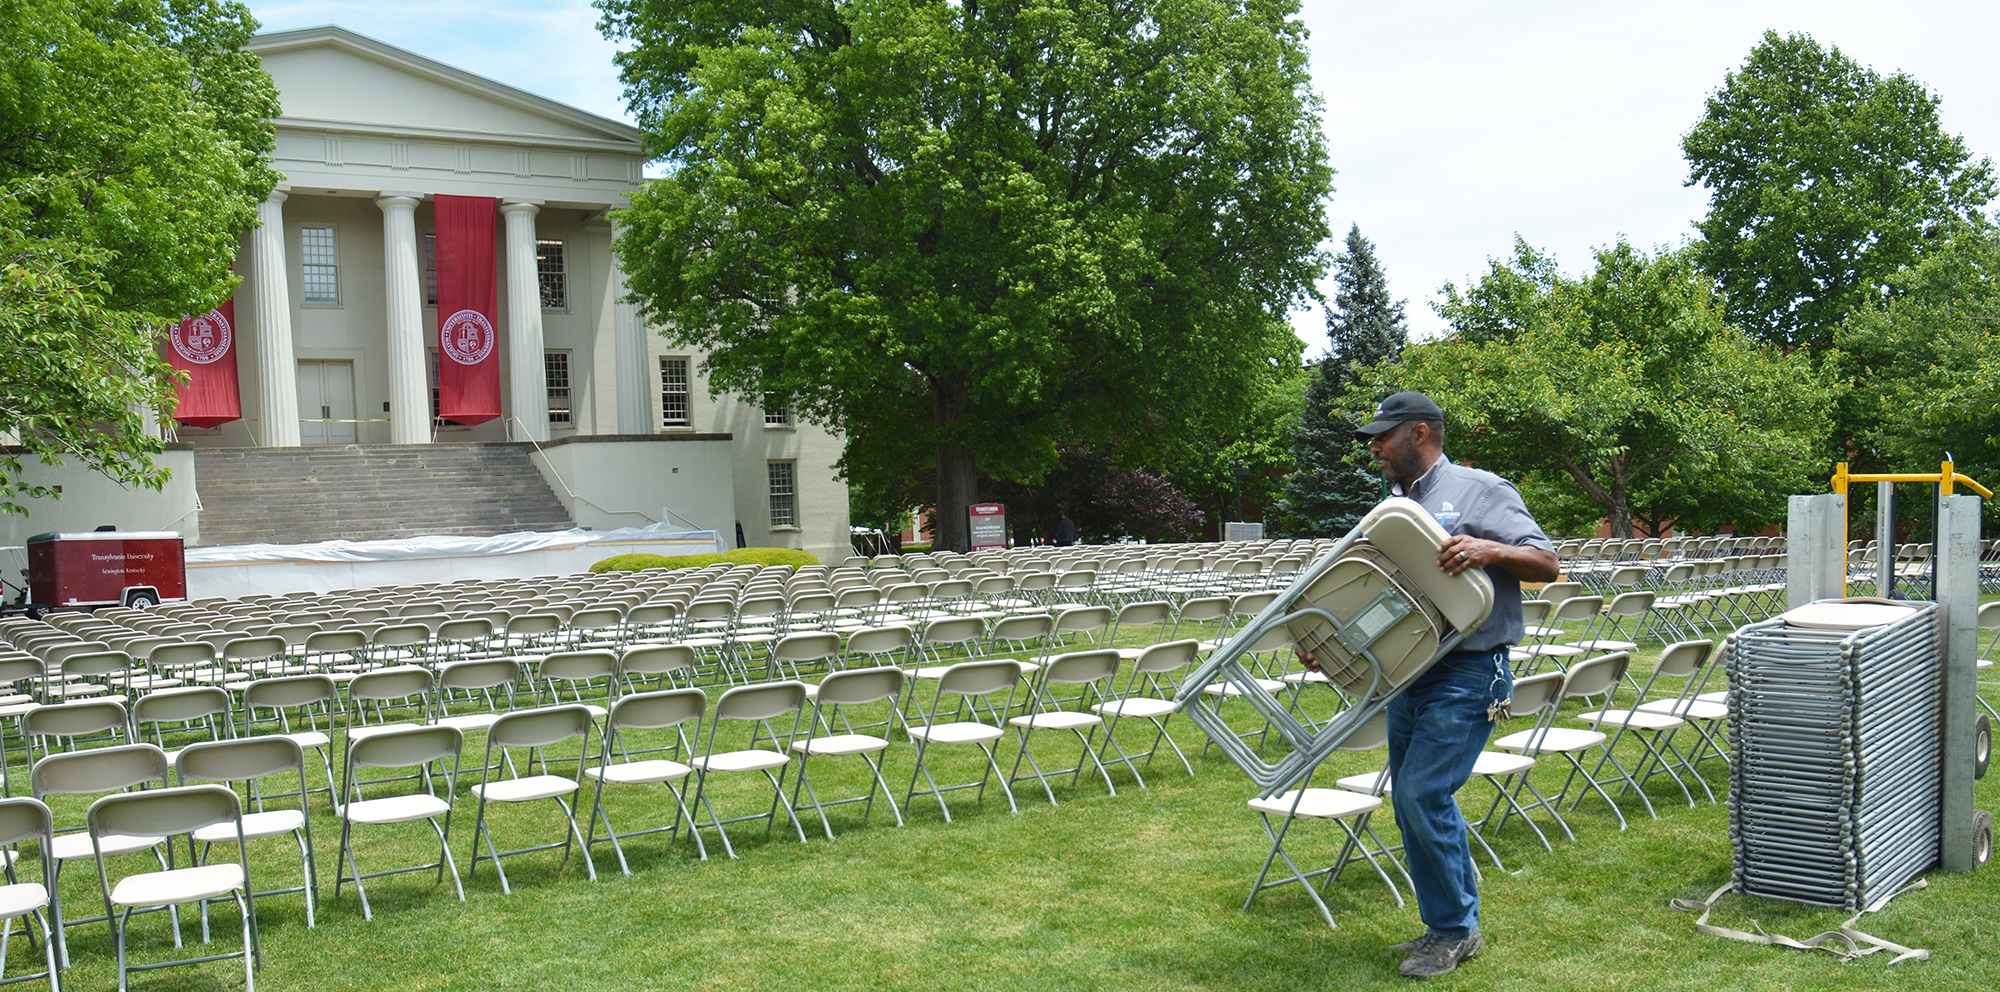 Putting out chairs on Old Morrison lawn